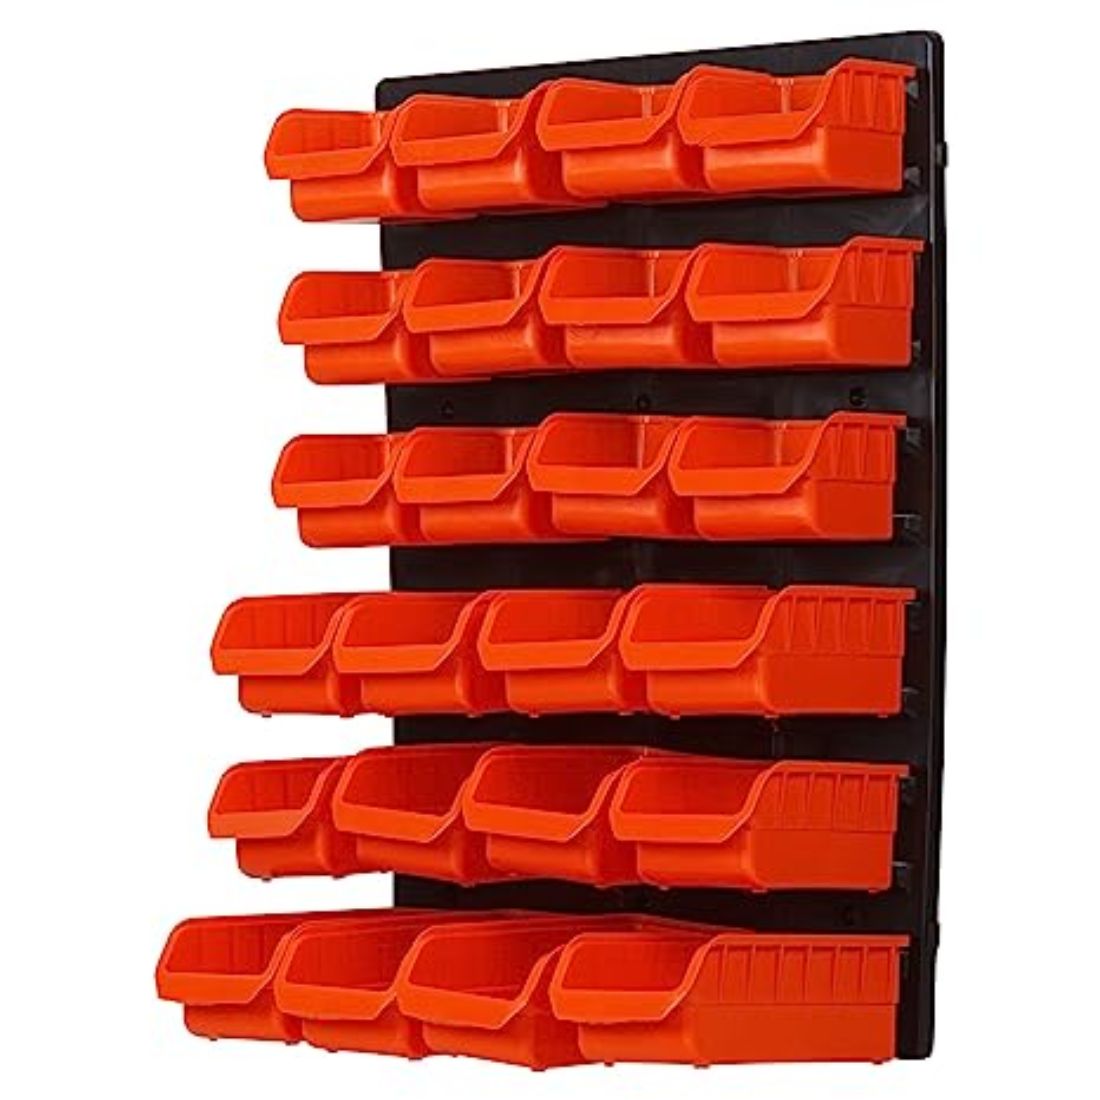 BLACK+DECKER BDST73832-8 Wall Panel Set with Bins, Racks and Holders (43-Pieces)